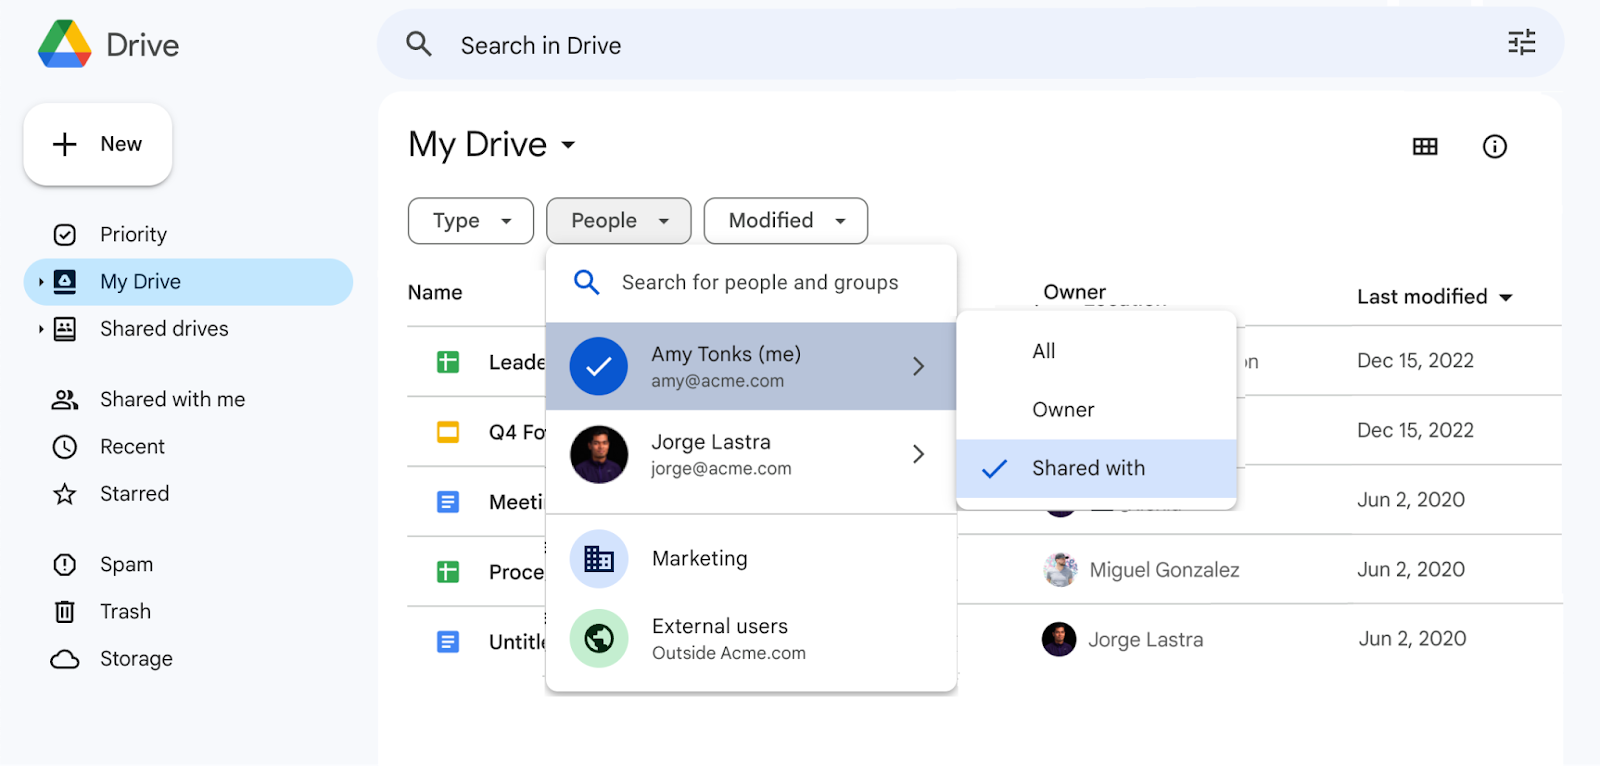 Google My Drive view with the new People filter selected at the top, showing example people listed